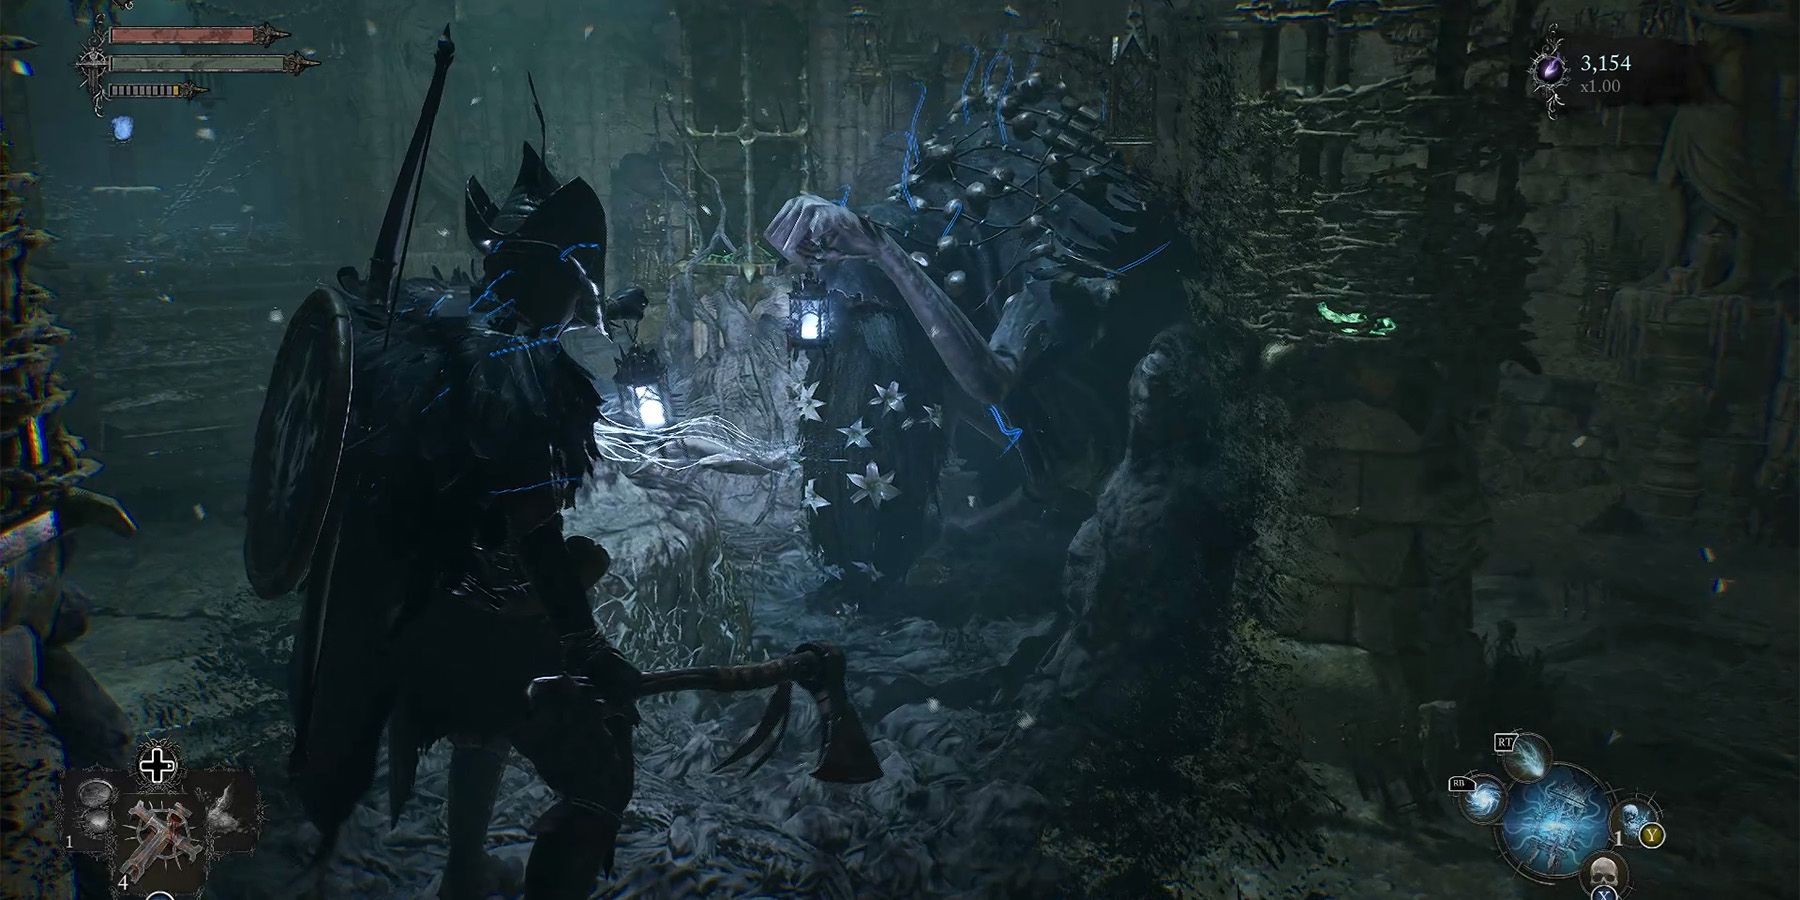 LORDS OF THE FALLEN on X: The dual worlds of Axiom and Umbral